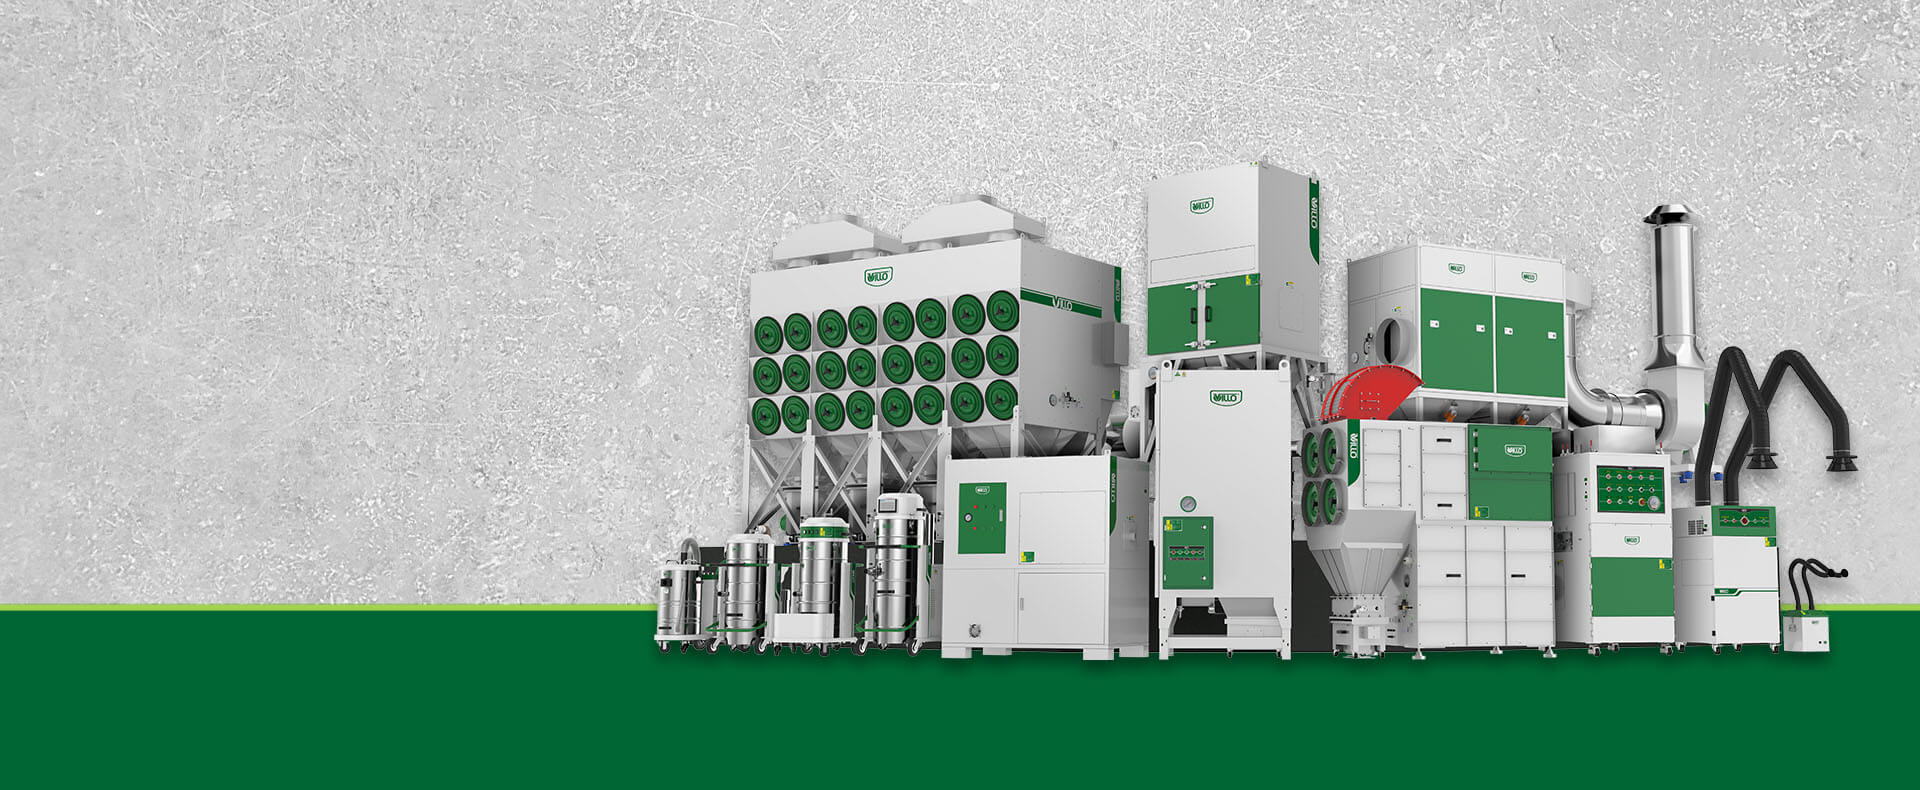 Industrial Dust Collector In Pharmaceutical Industry